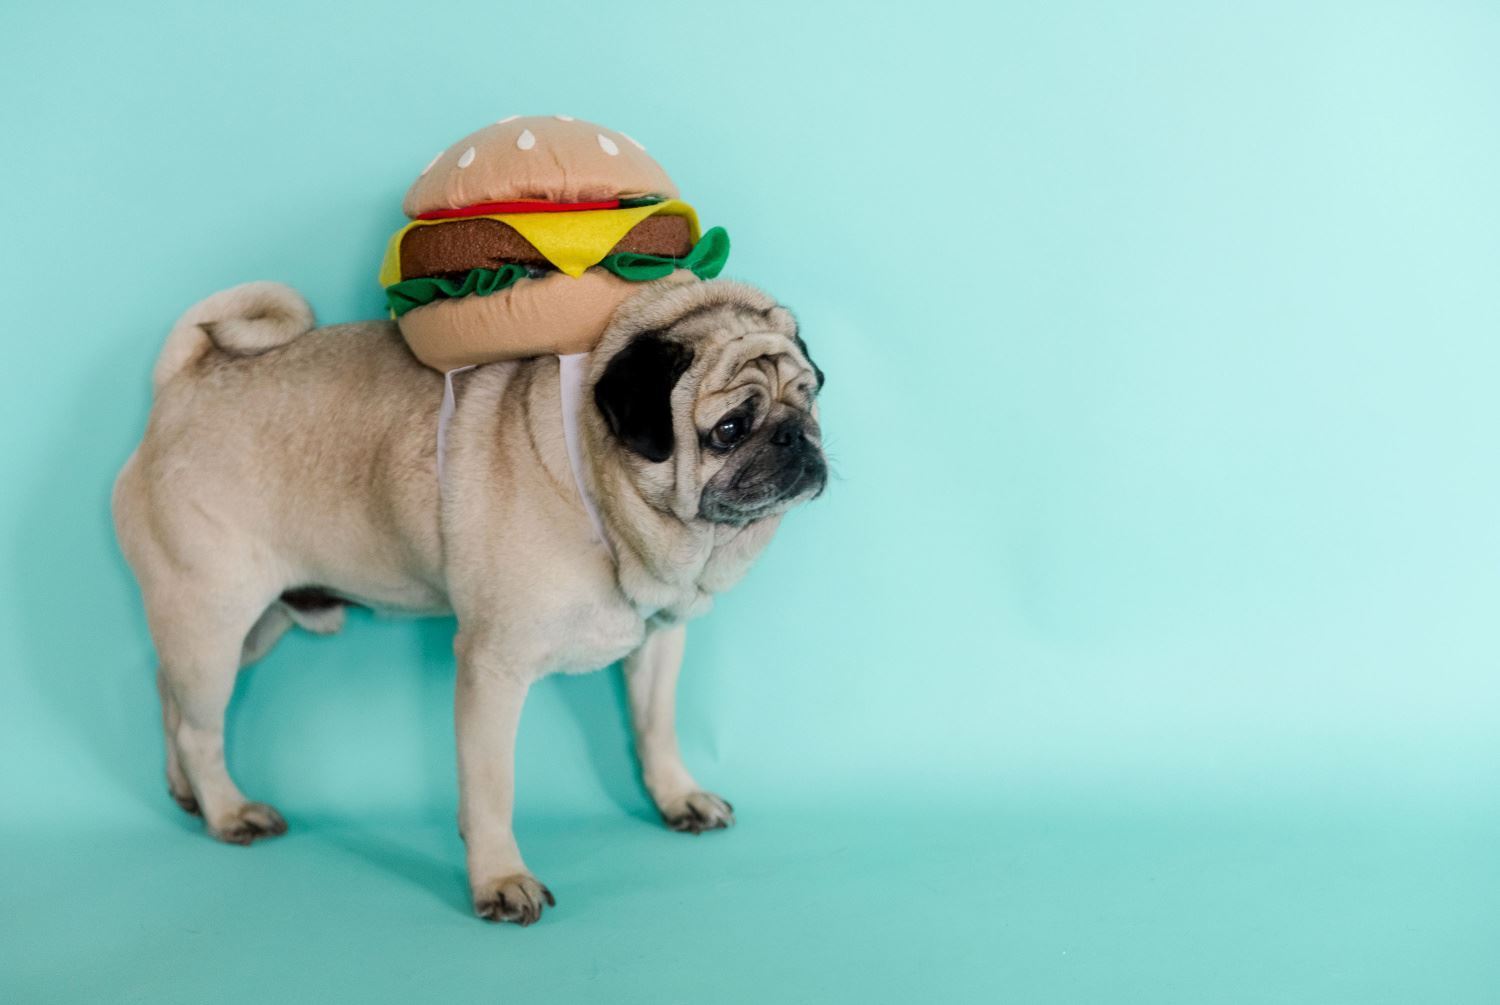 Dress up your dog in your DIY burger costume!